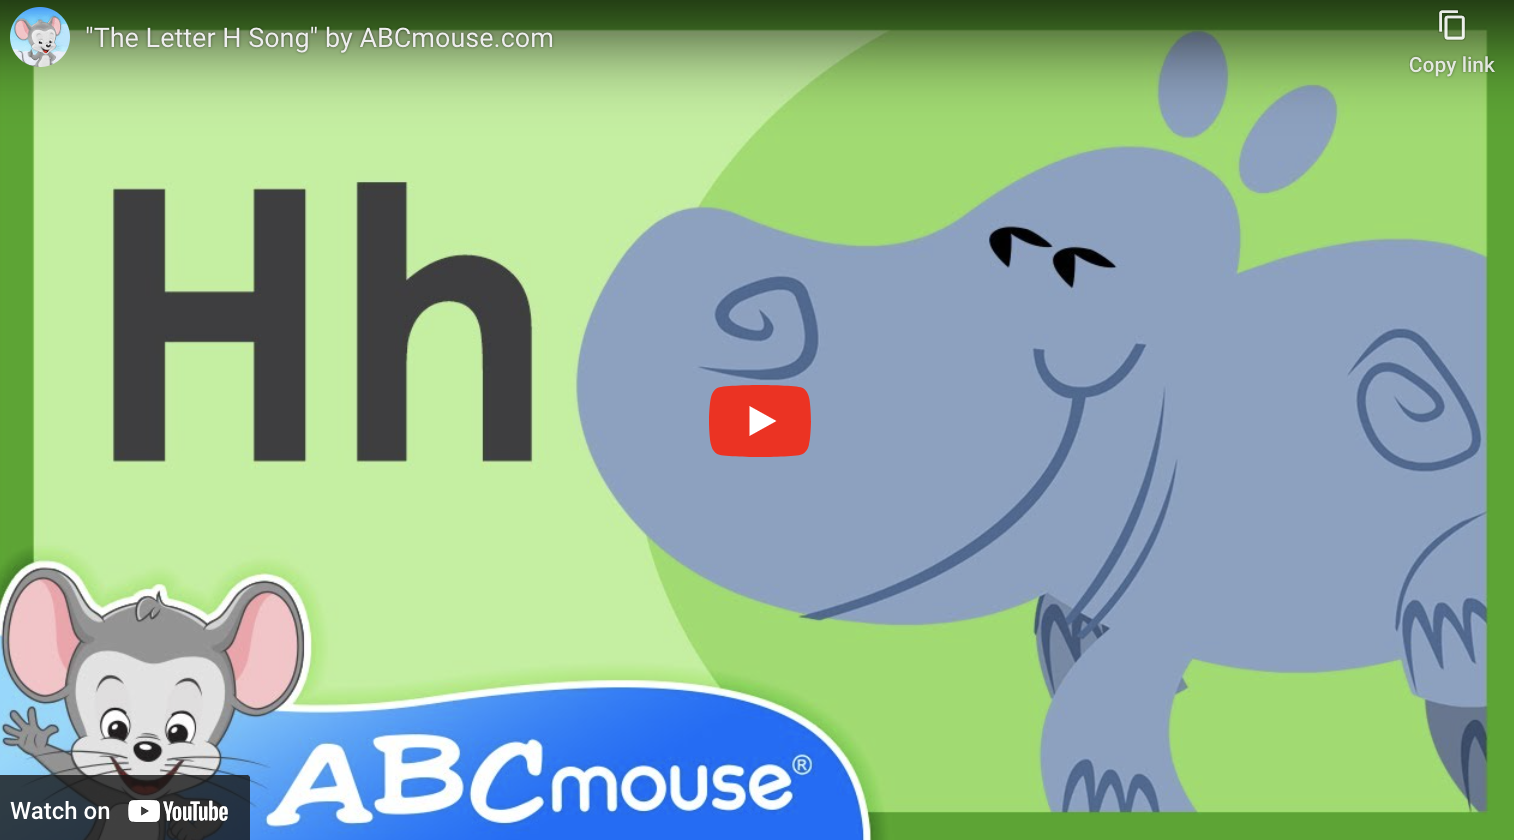 Letter H song from ABCmouse.com. 